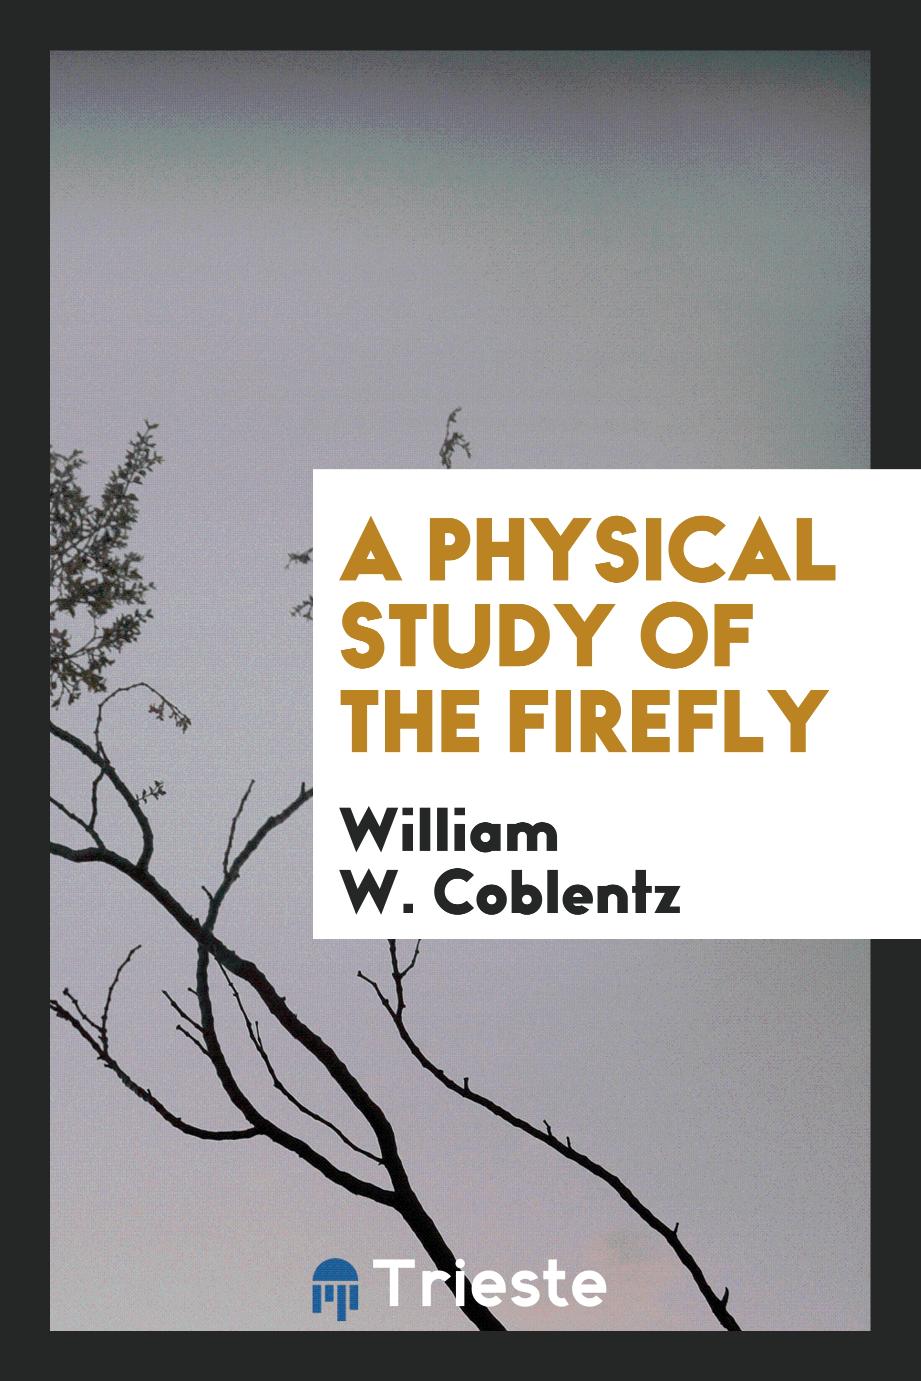 A physical study of the firefly